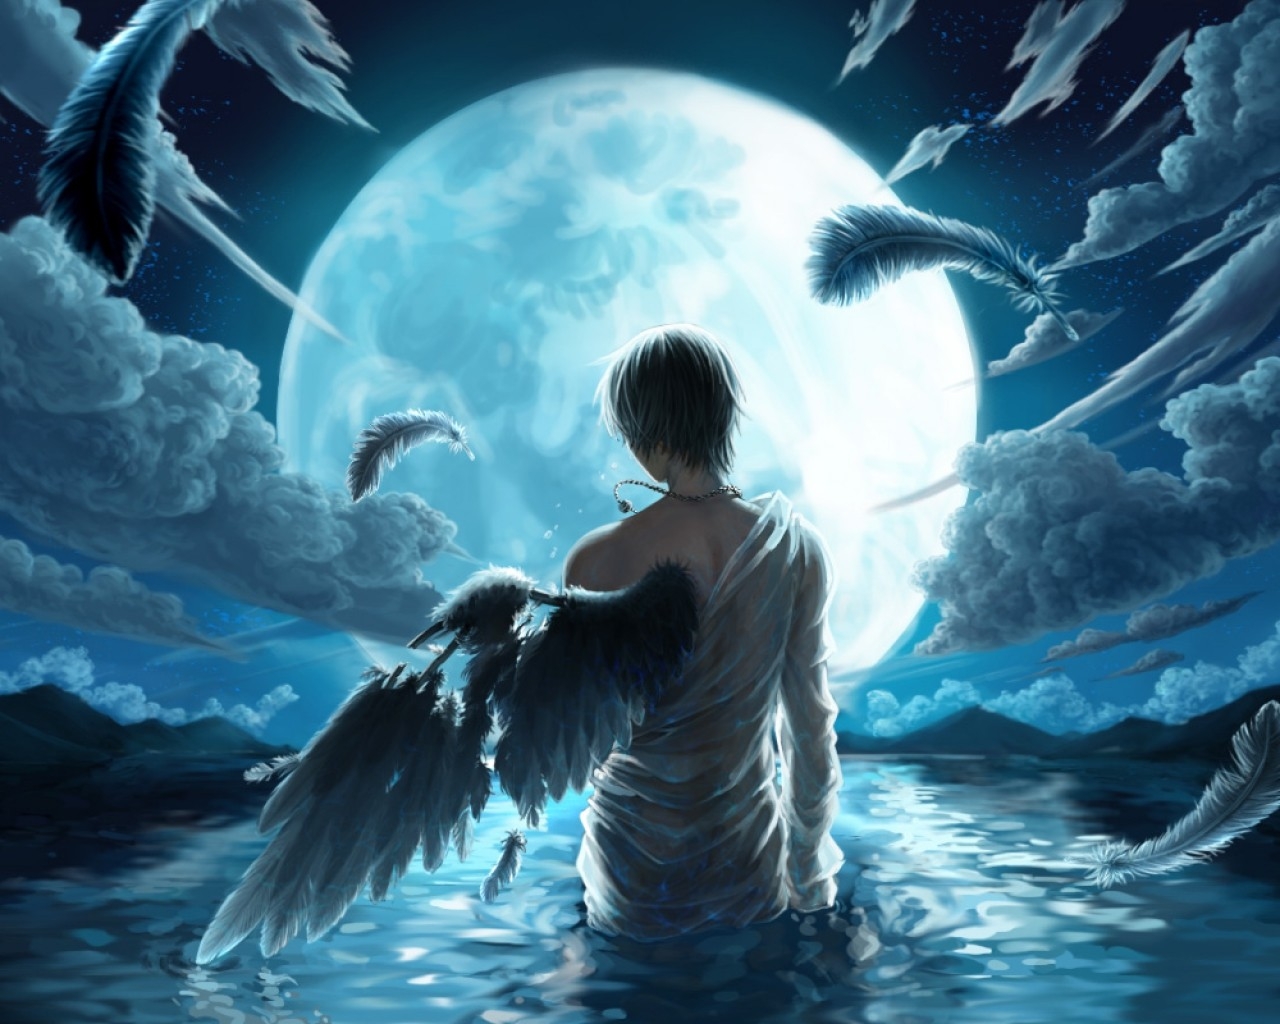 Anime Boy Looking At The Moon - 1280x1024 Wallpaper 